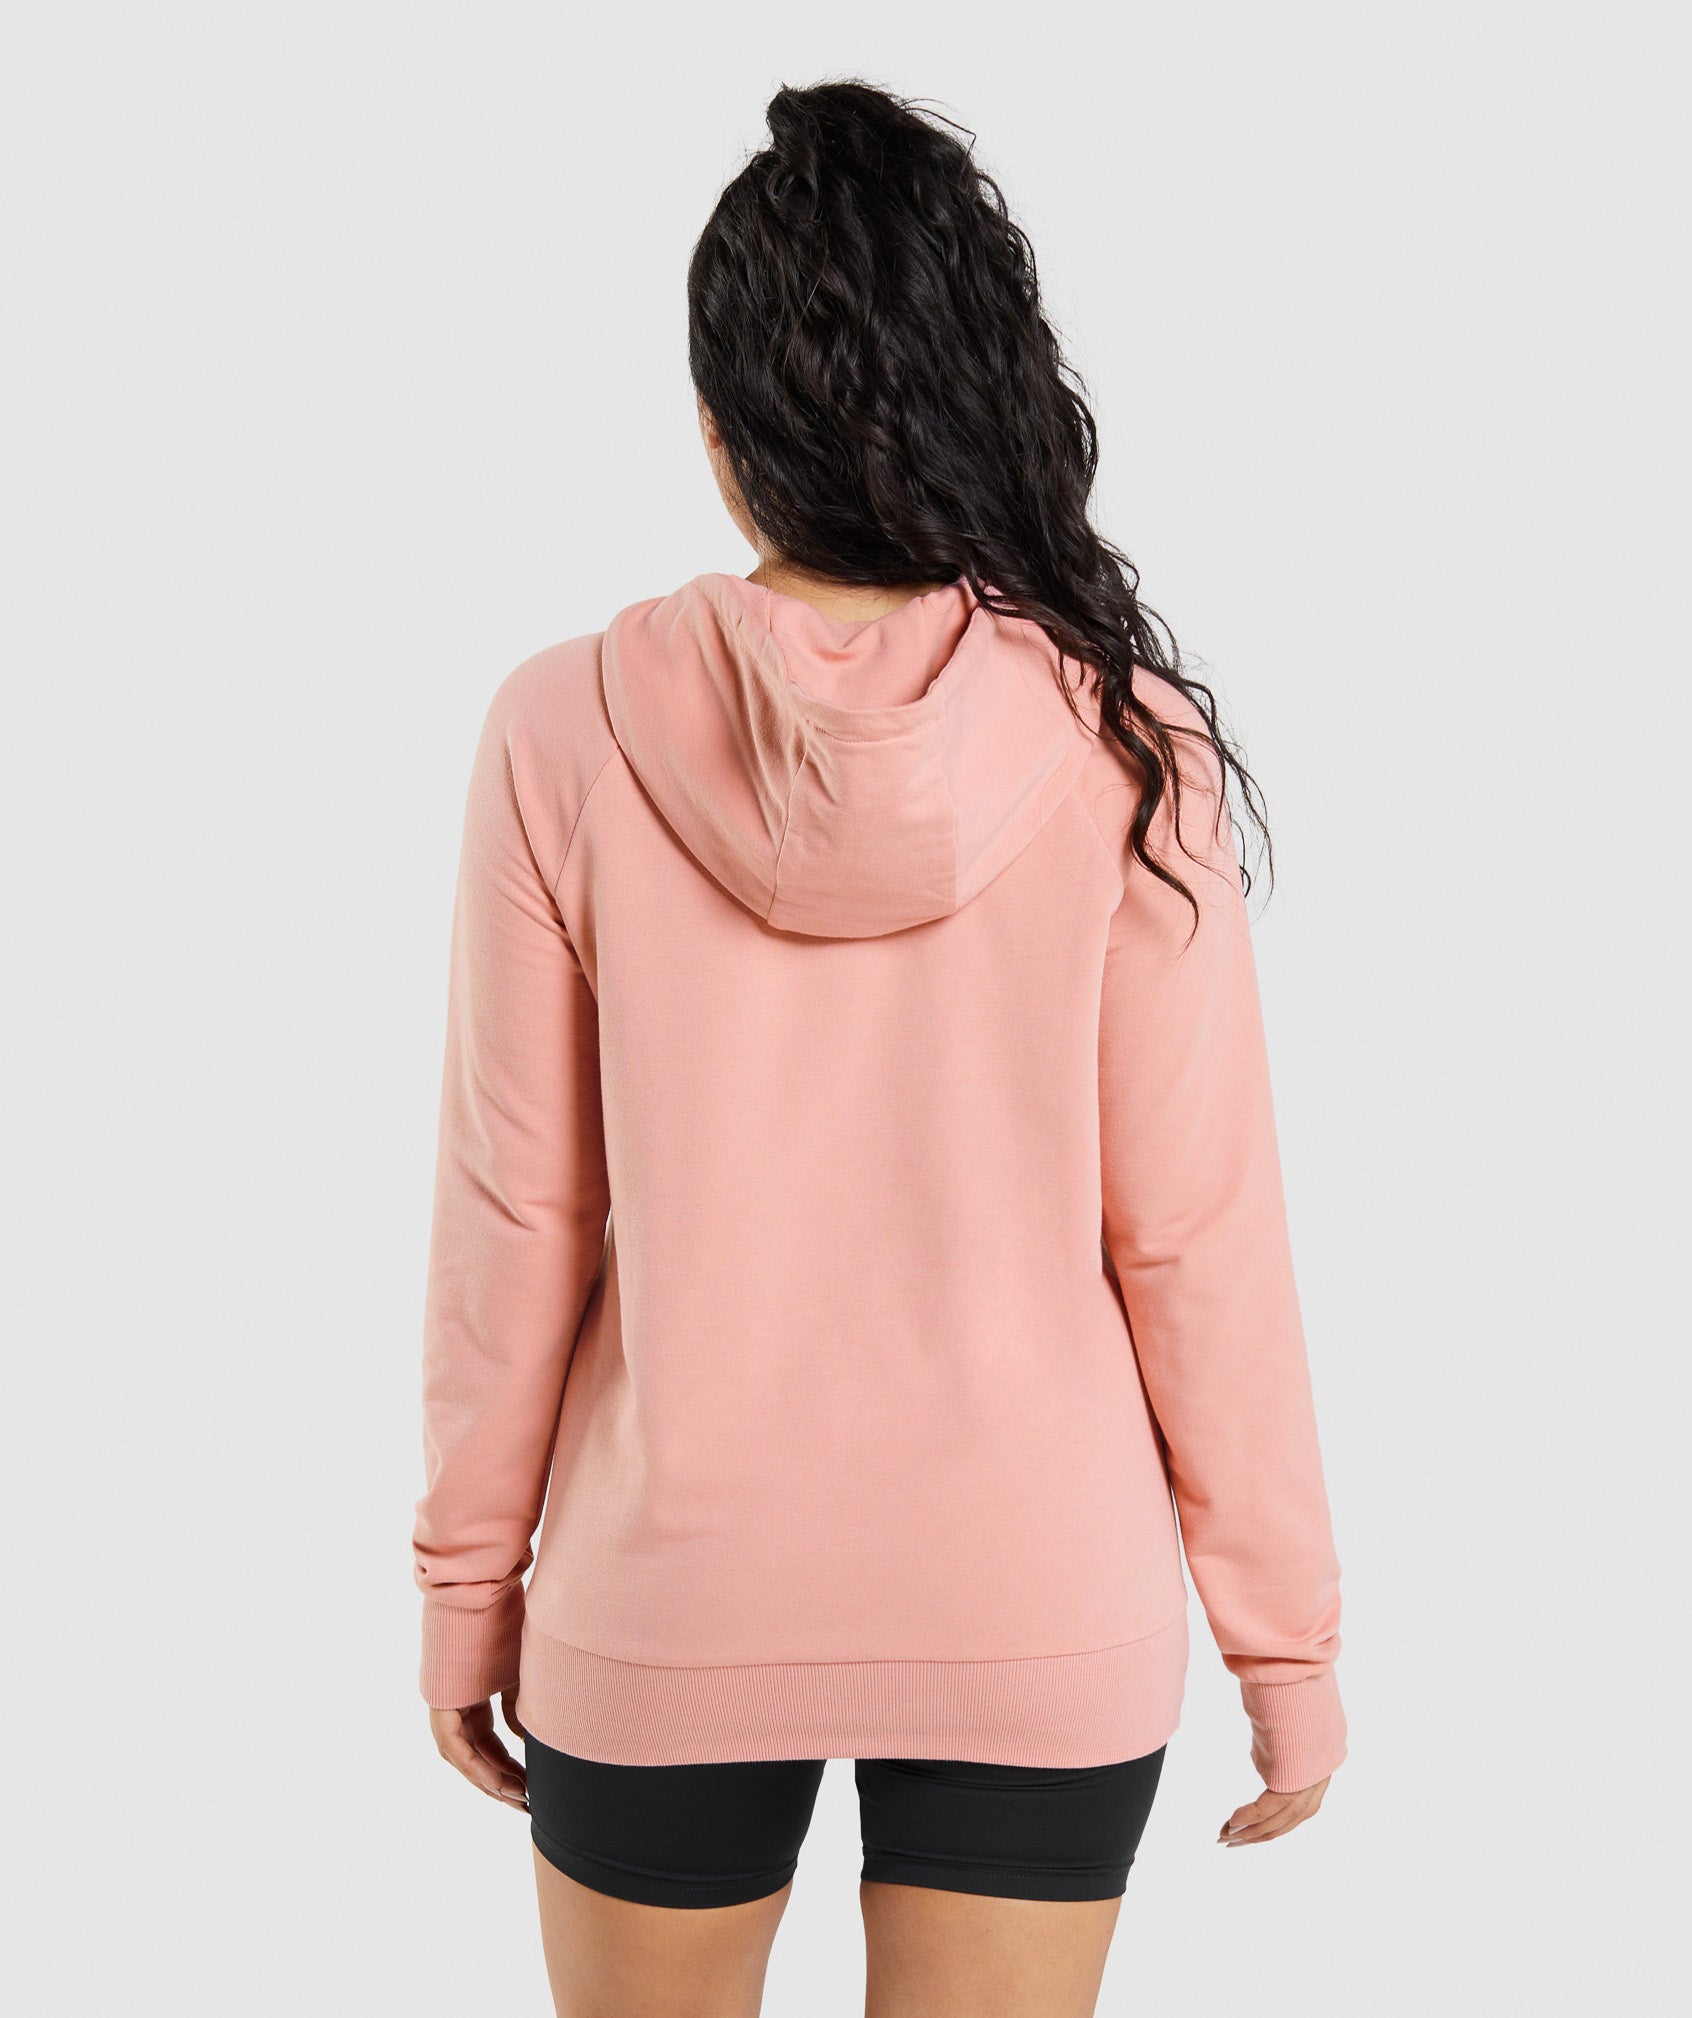 Training Hoodie in Paige Pink - view 2